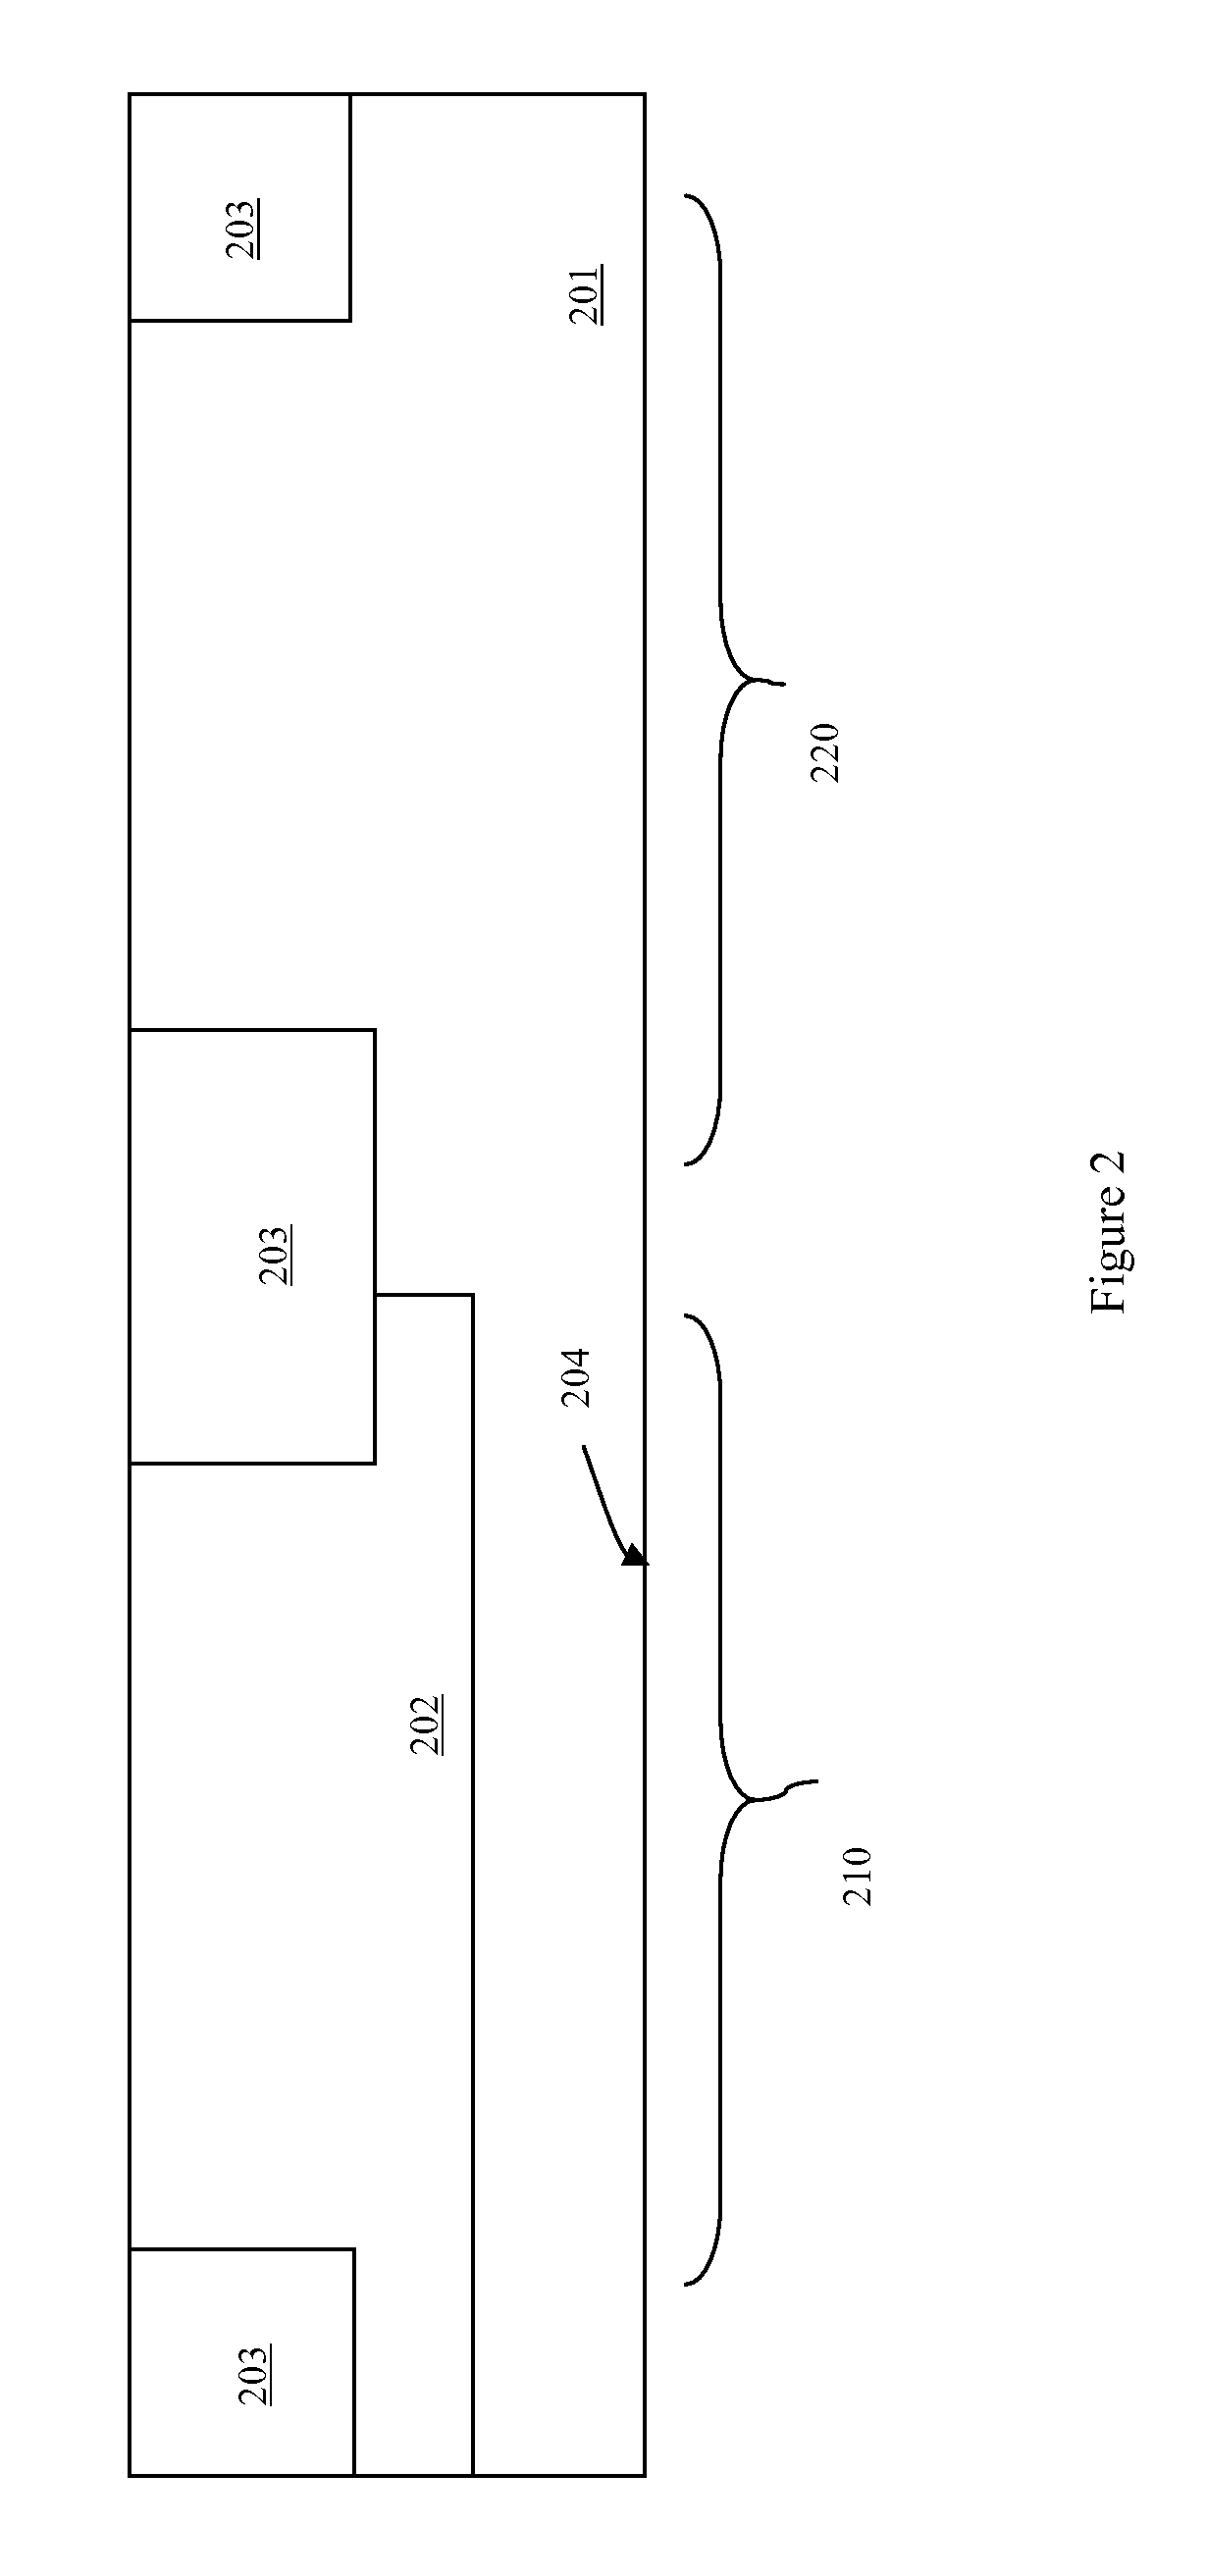 Complementary metal oxide semiconductor device with an electroplated metal replacement gate